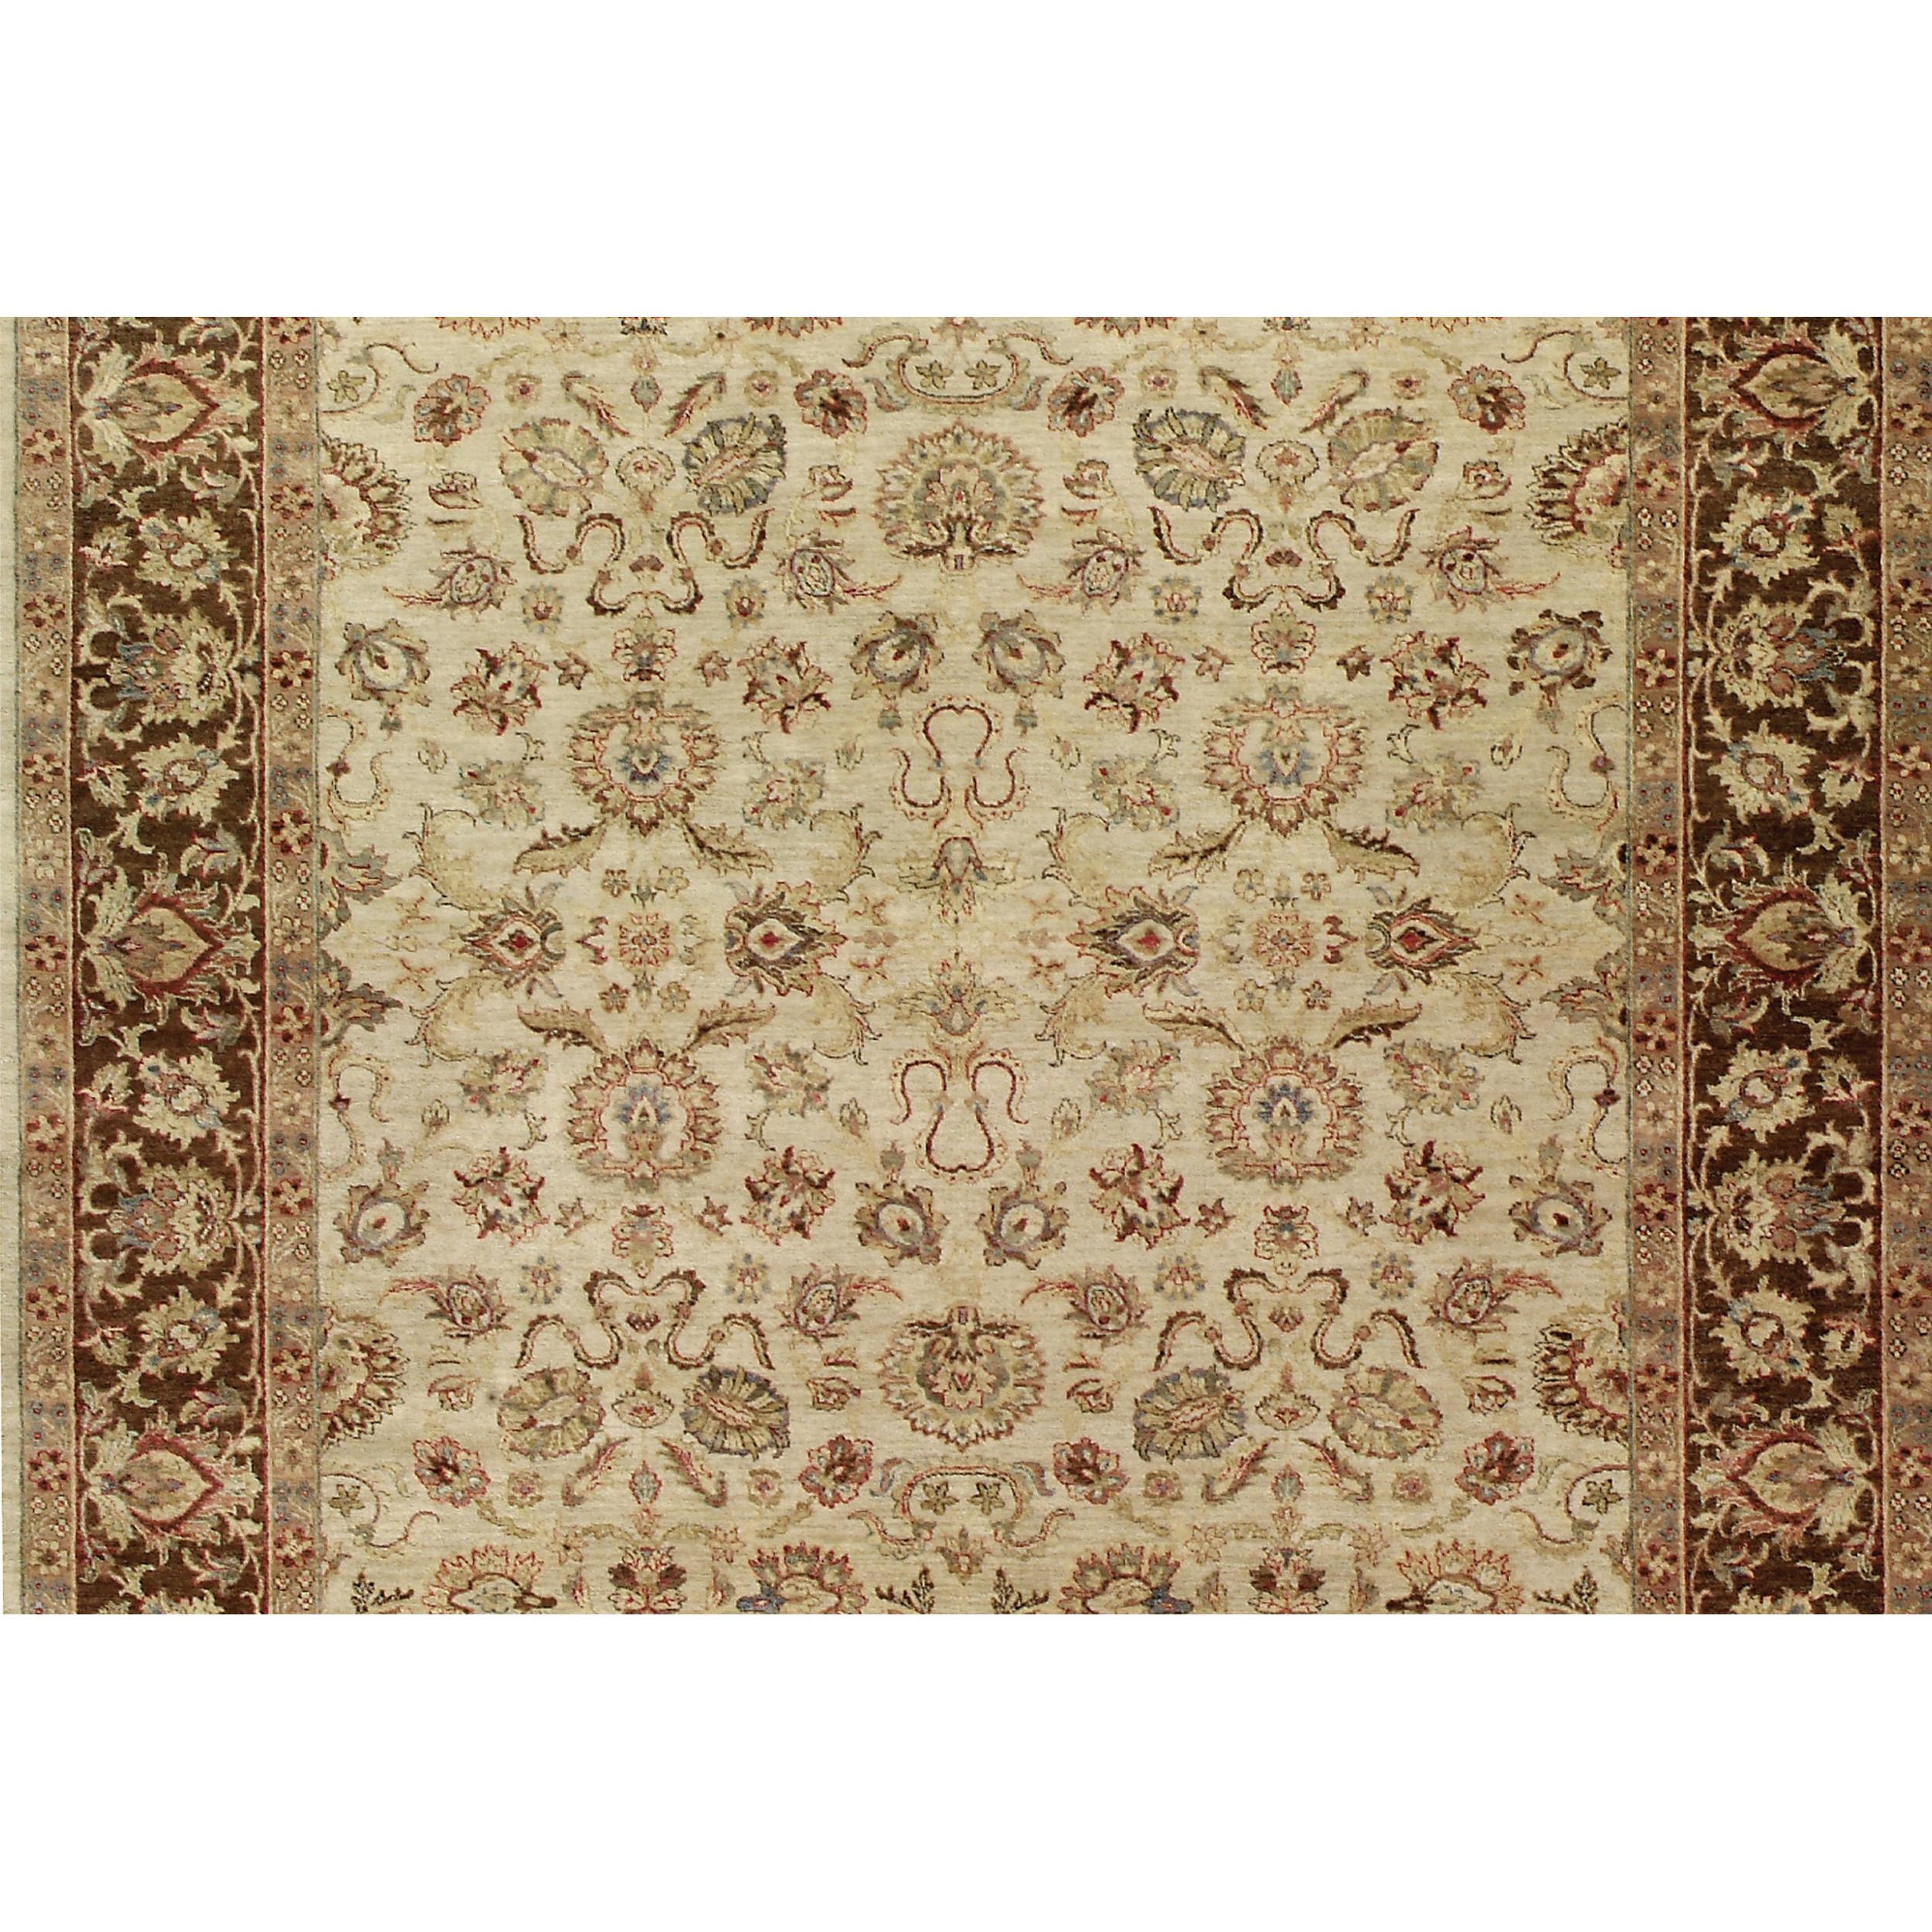 Indian Luxury Traditional Hand-Knotted Cream/Mocha 12X18 Rug For Sale